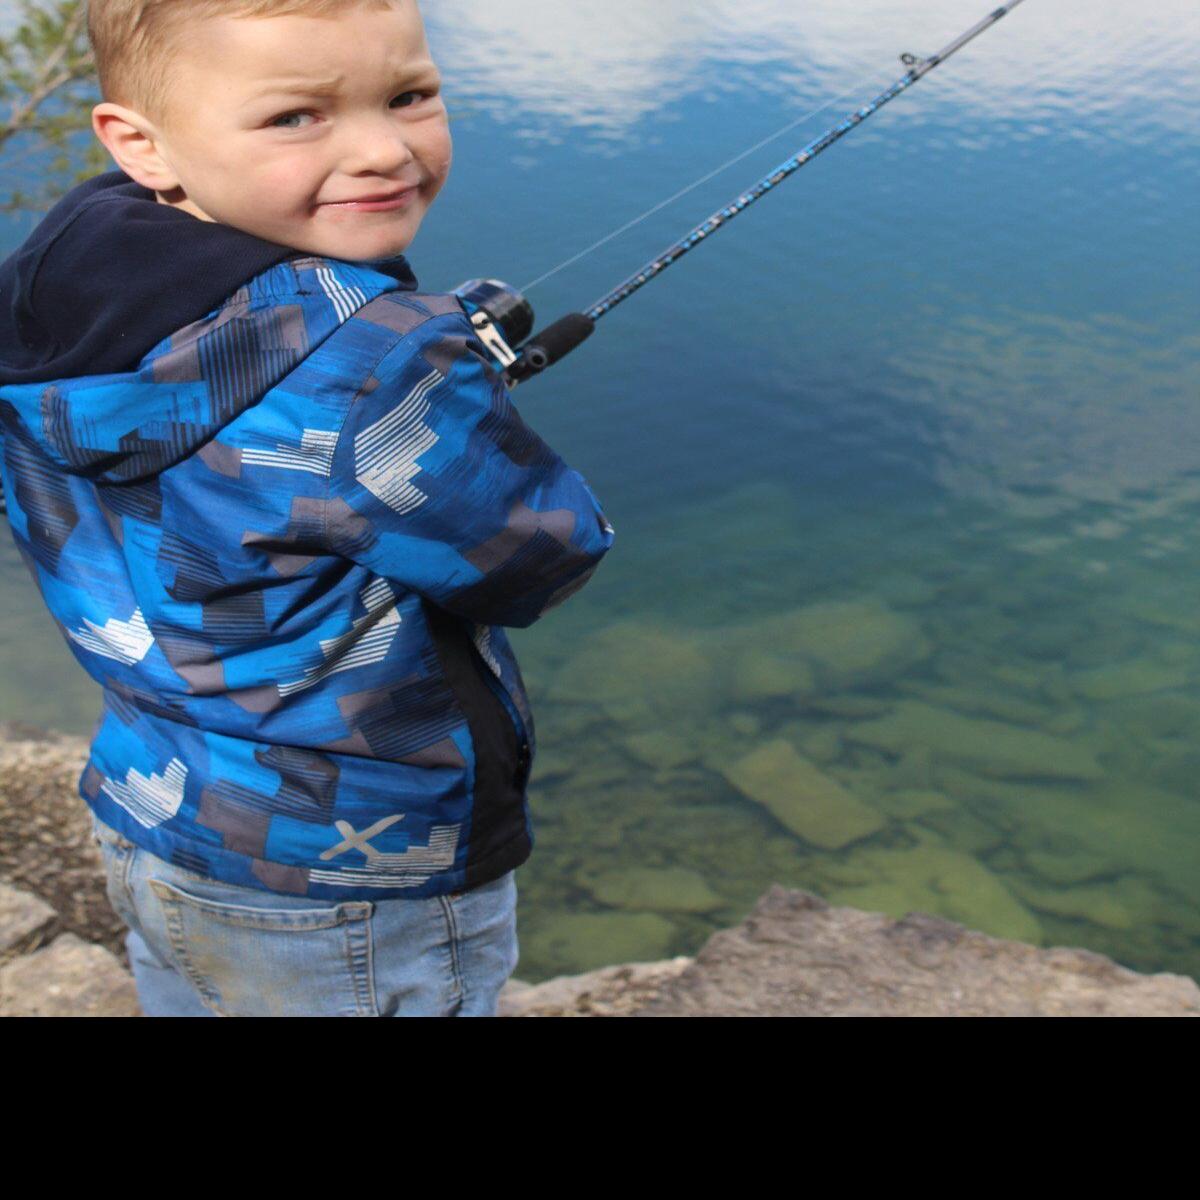 Families and fishing go together at Seymour Conservation Area